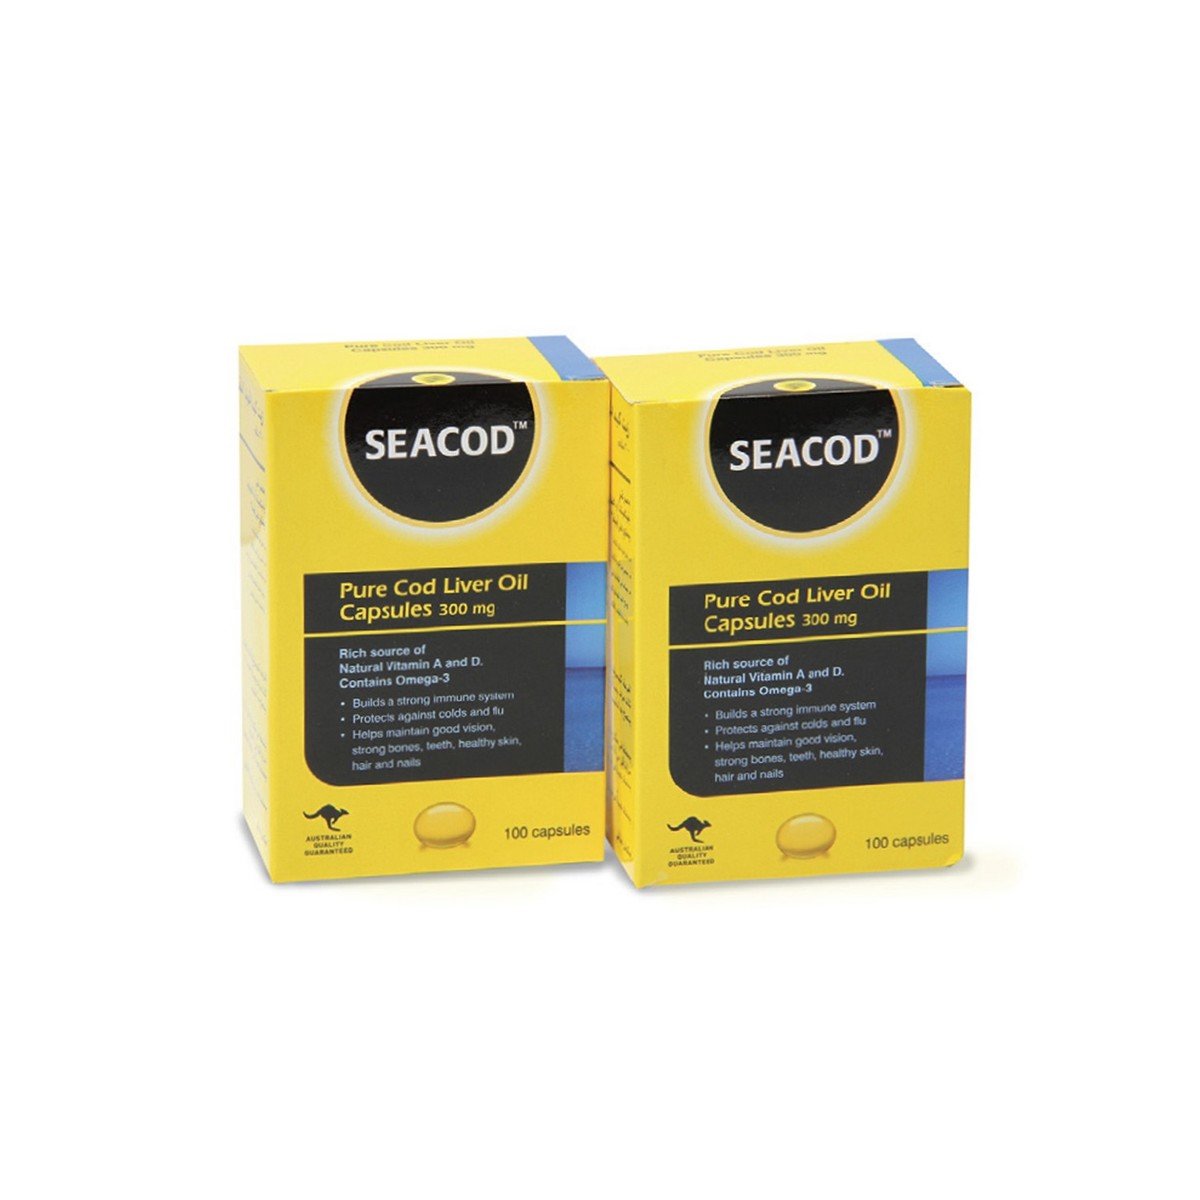 Seacod Pure Cod Liver Oil Capsules 300mg Value Pack 2 x 100 pcs